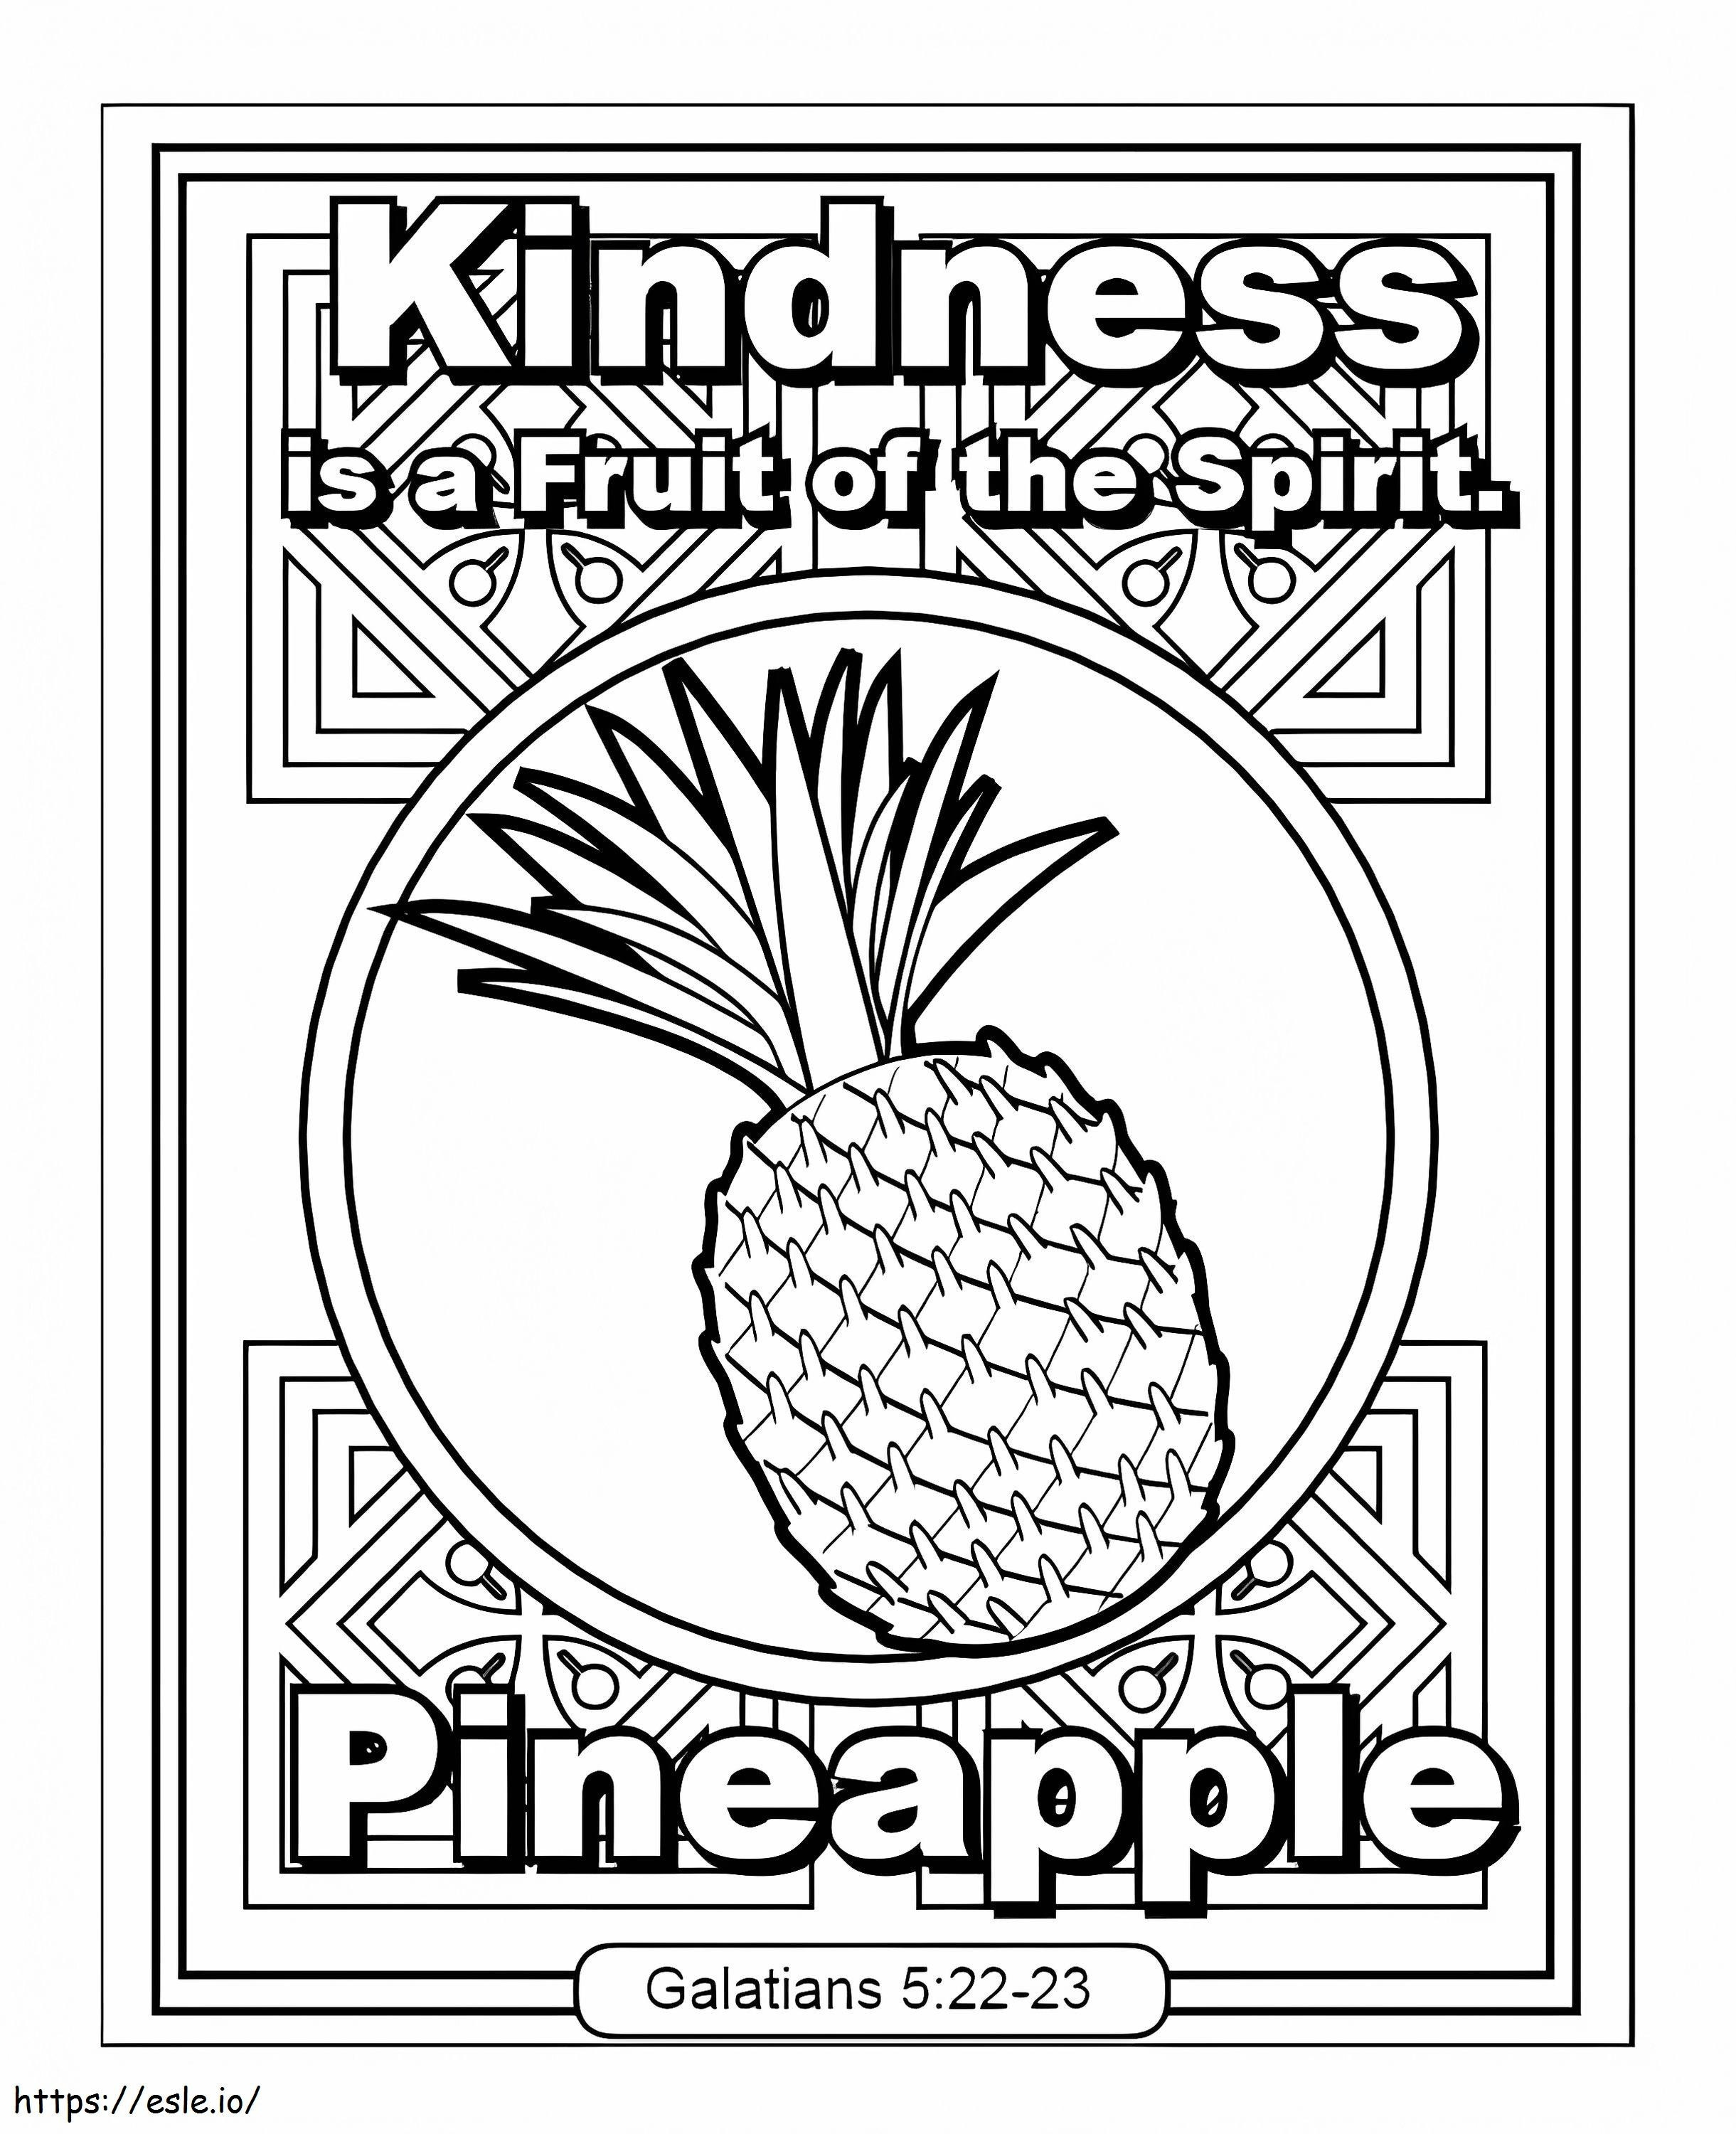 Kindness Fruit Of The Spirit coloring page